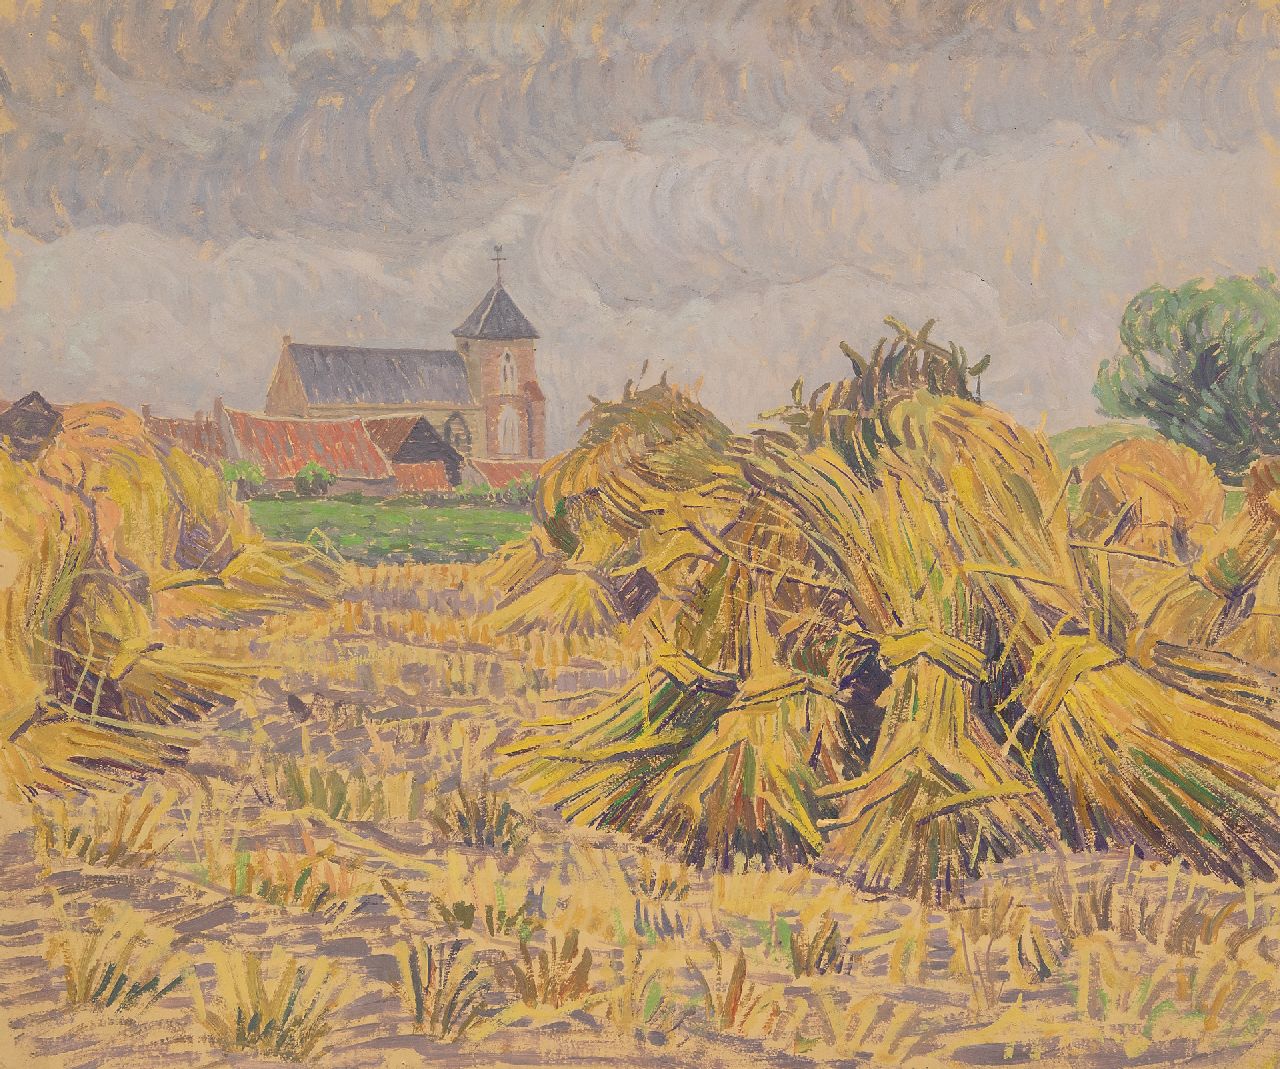 Pijpers E.E.  | 'Edith' Elizabeth Pijpers | Paintings offered for sale | A village church betweencornfields, oil on paper 38.1 x 48.5 cm, signed l.r.